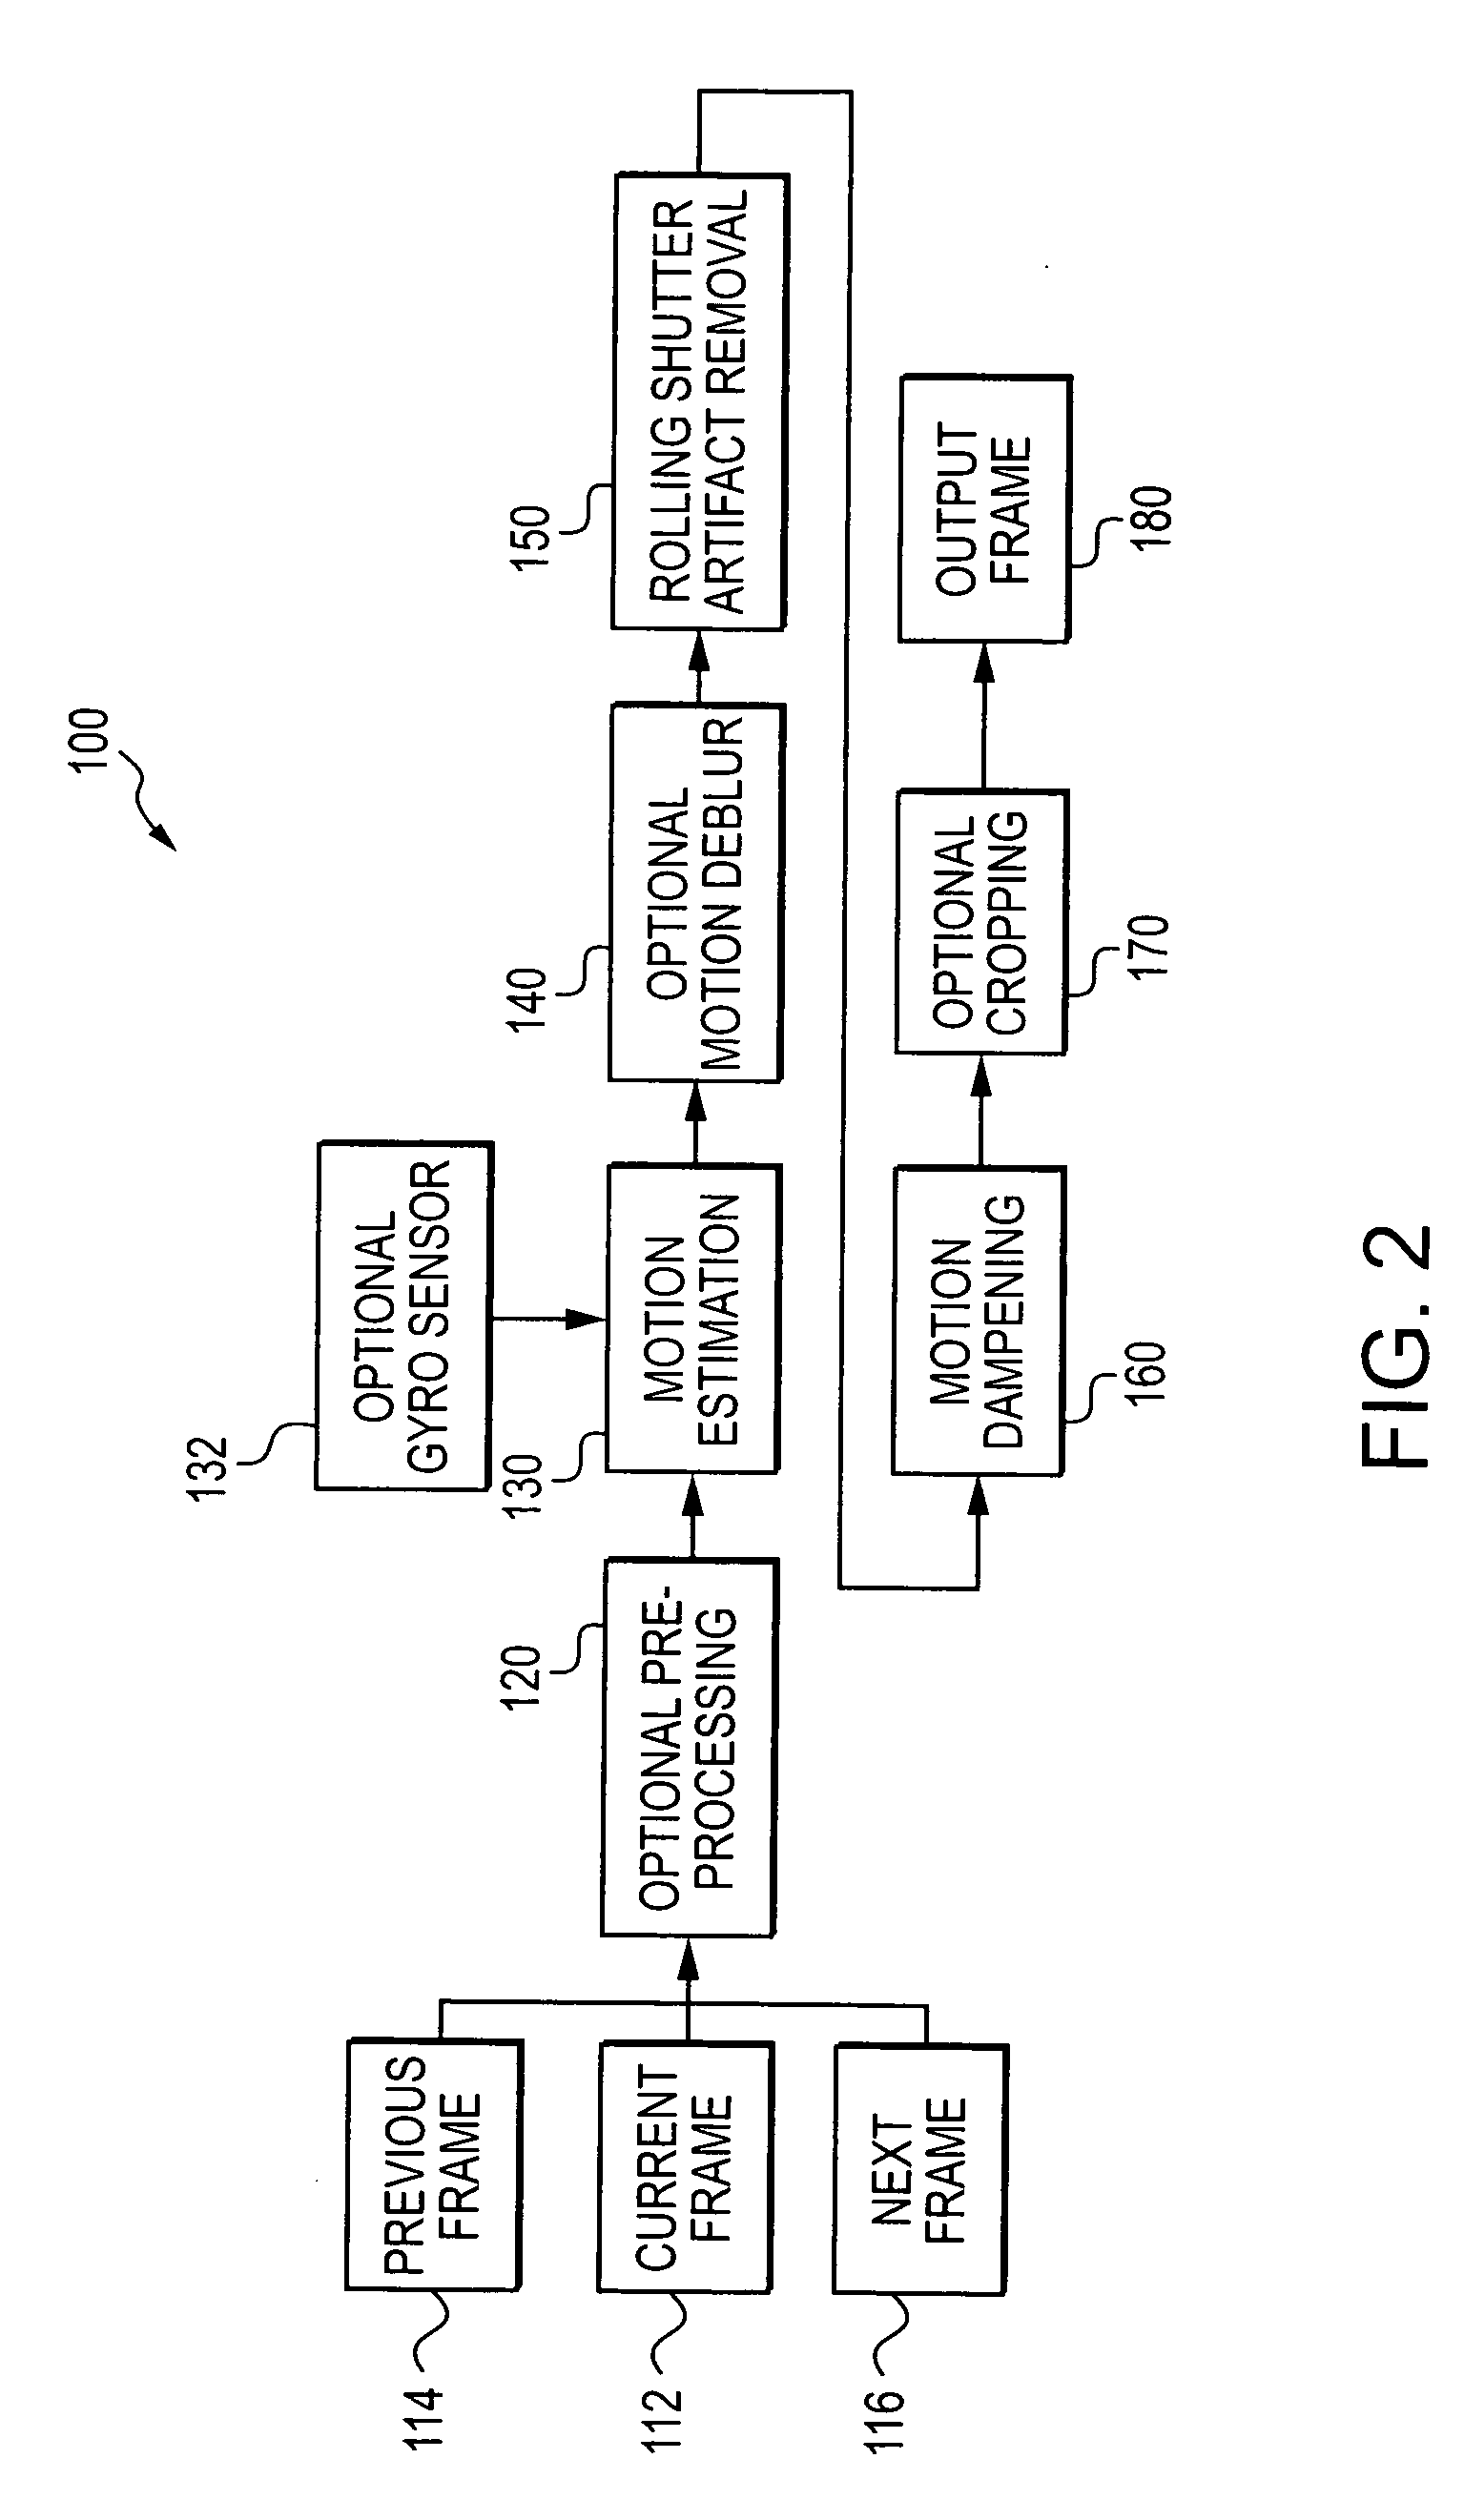 Methods and system for digitally stabilizing video captured from rolling shutter cameras